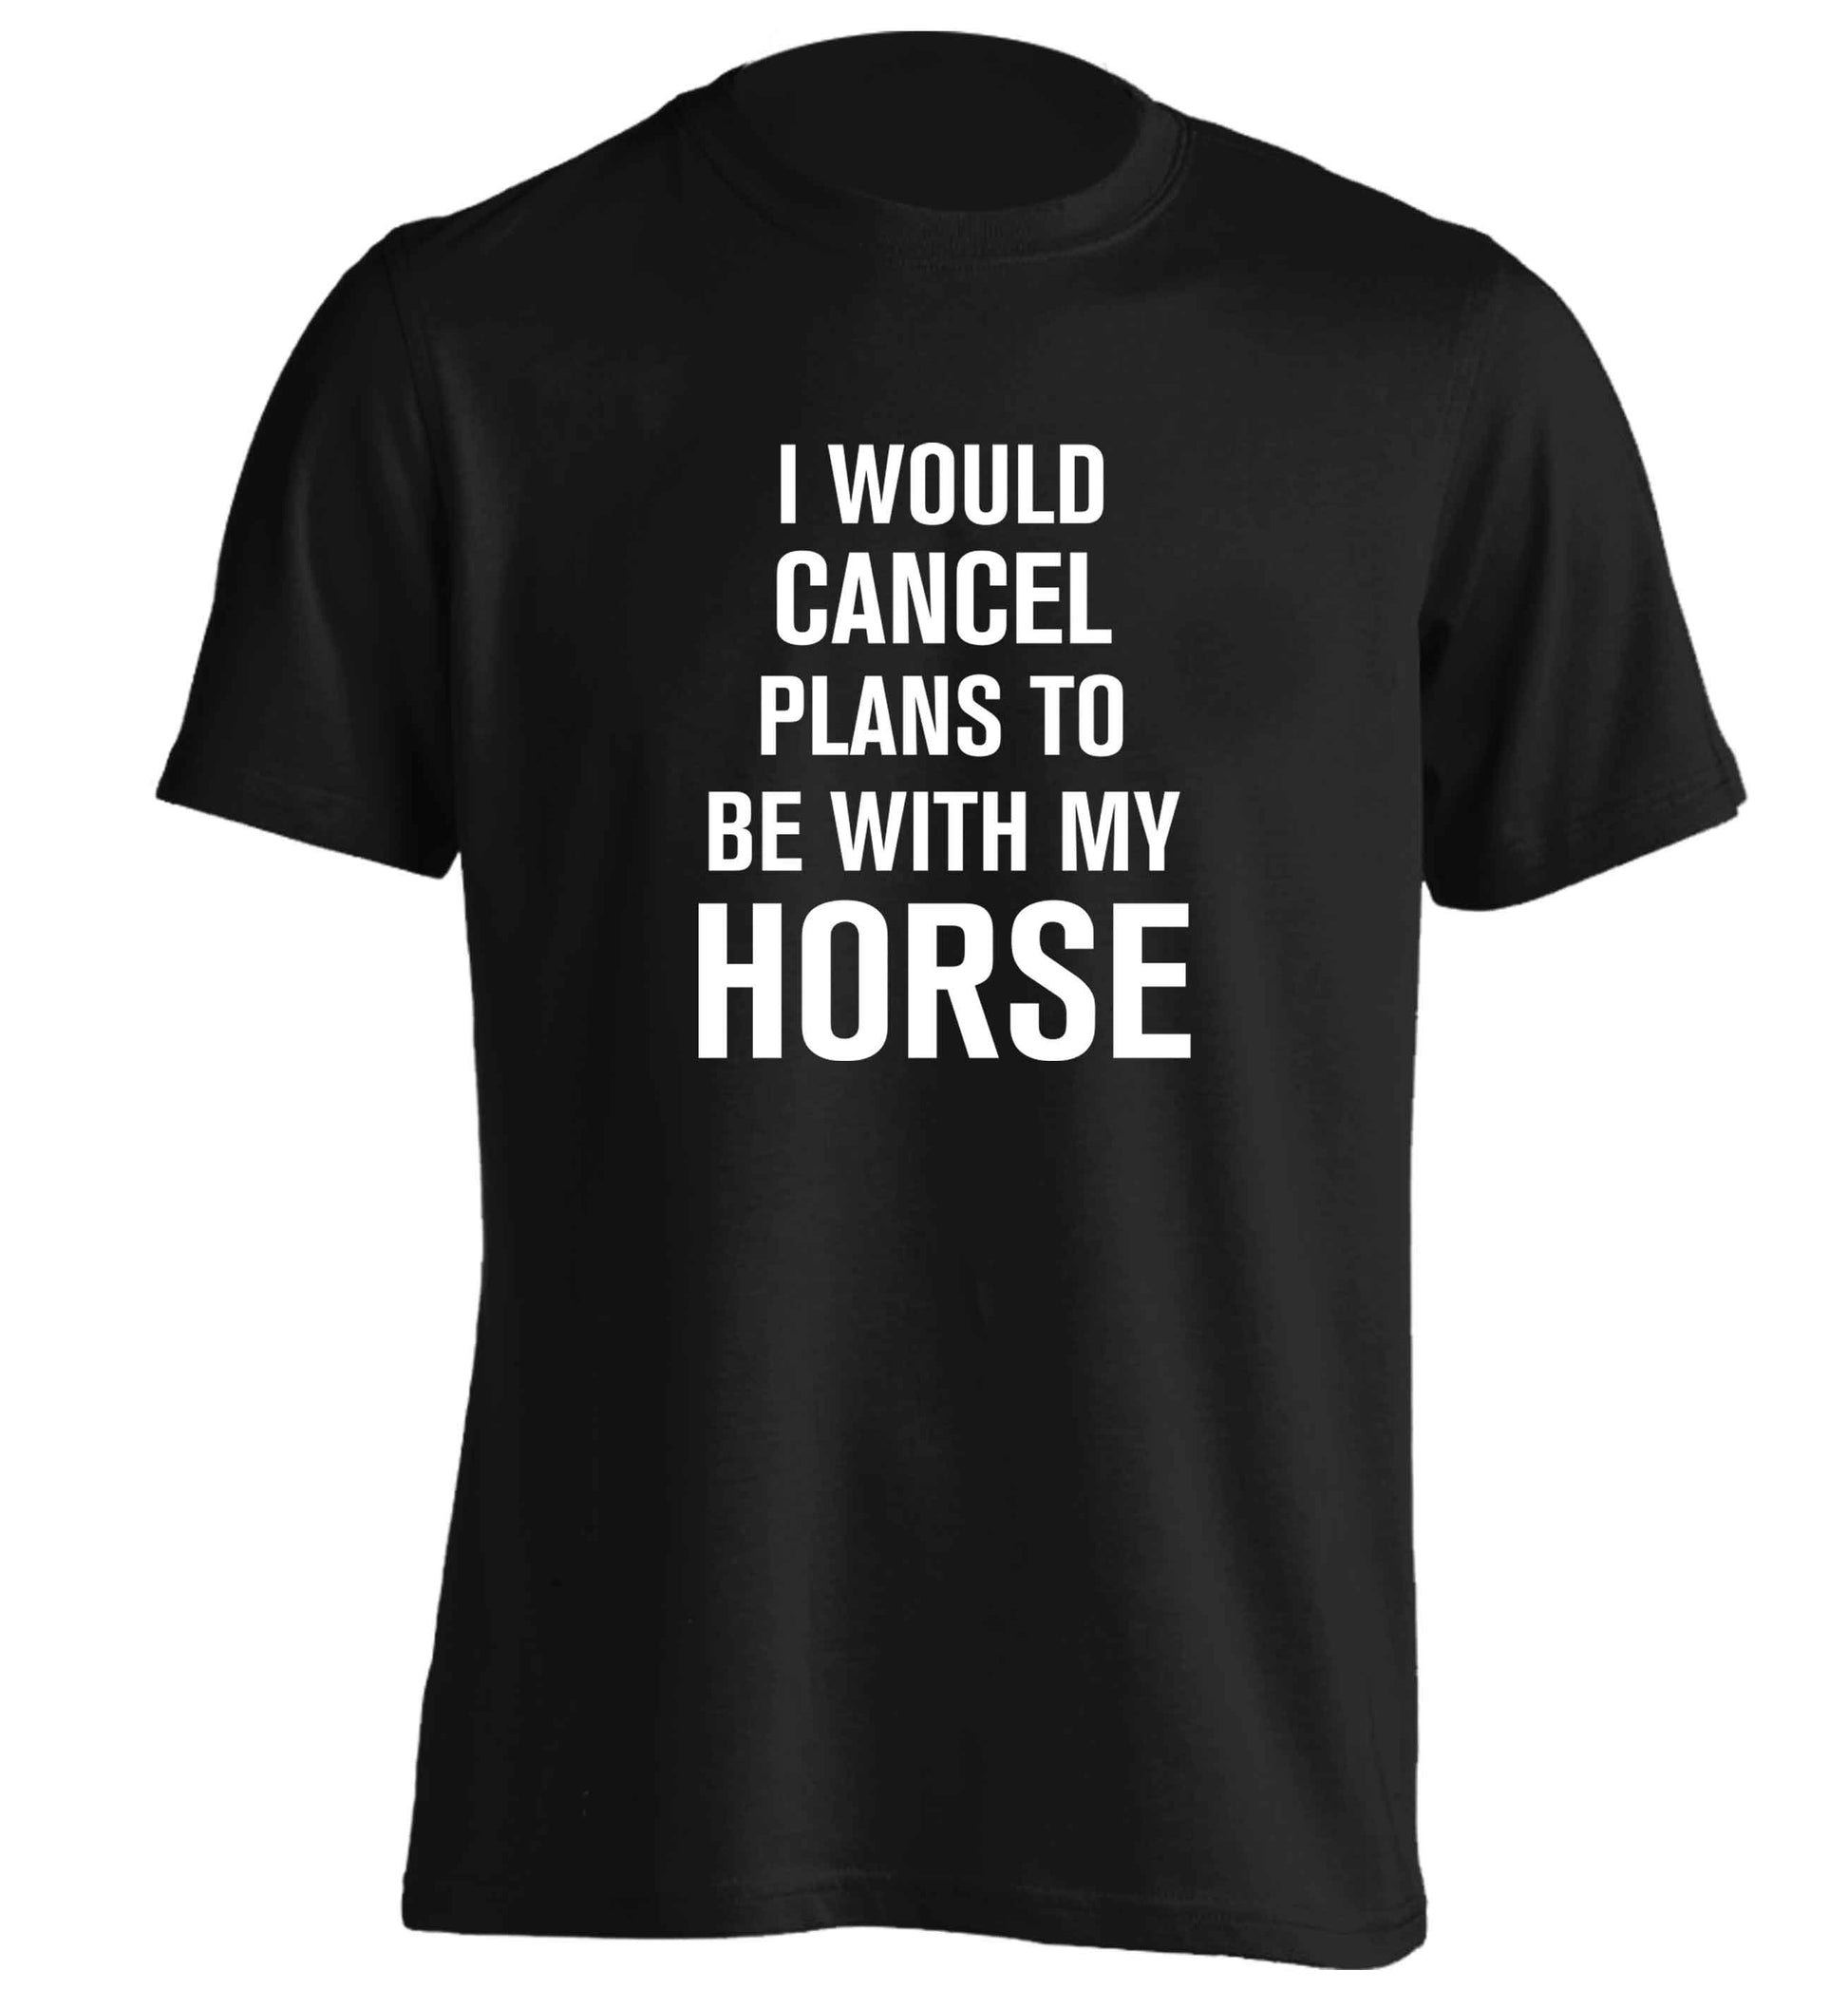 I will cancel plans to be with my horse adults unisex black Tshirt 2XL